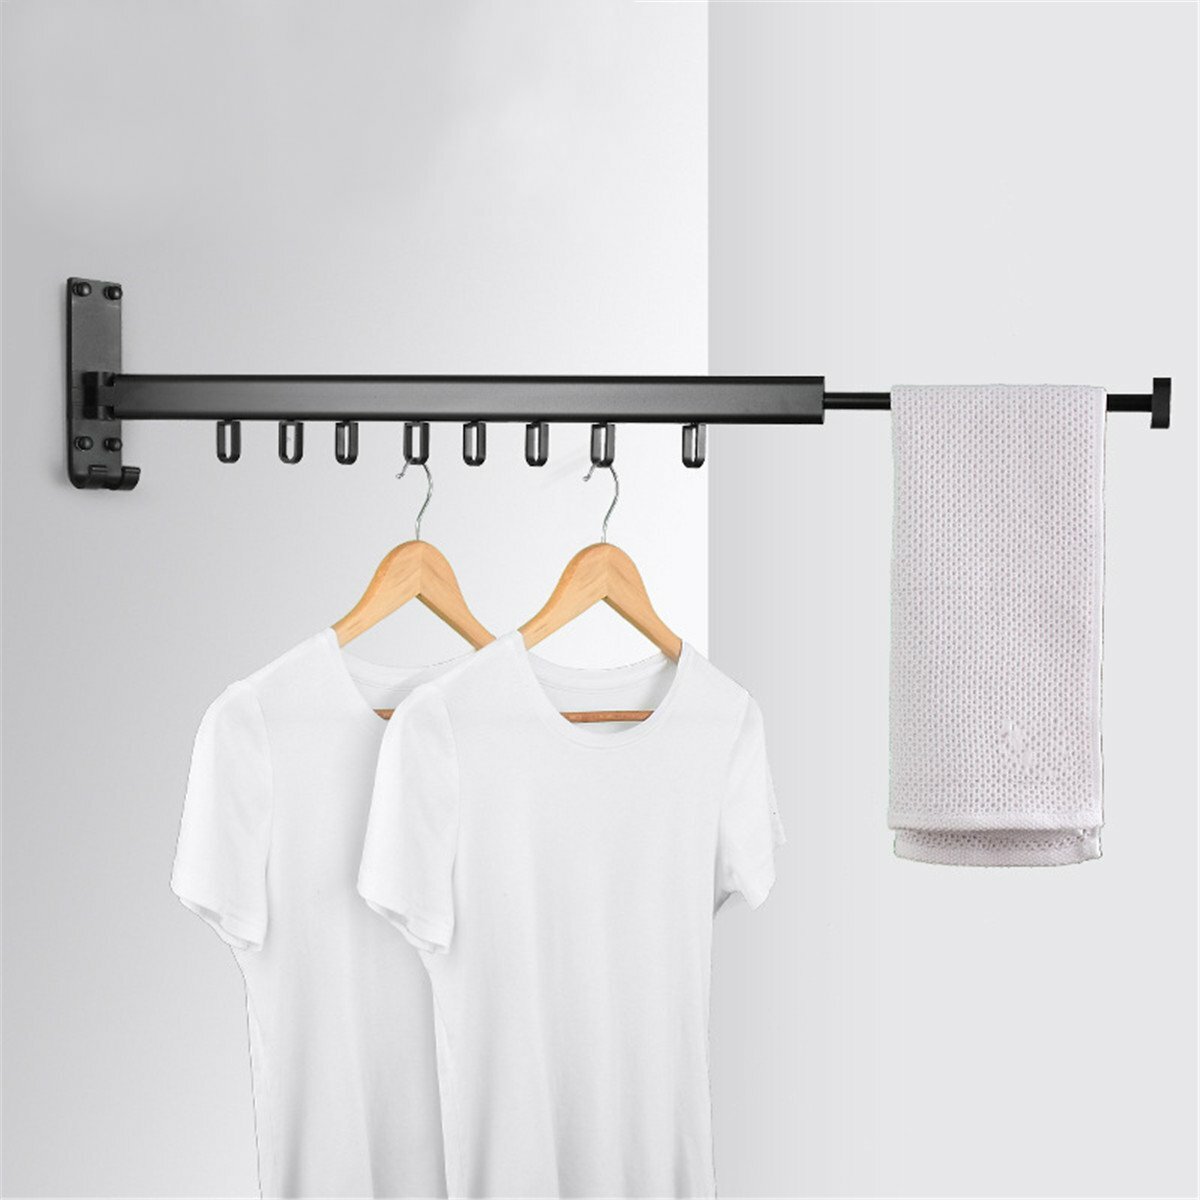 Folding Clothes Hanger Wall Mounted Telescopic Drying Rack Balcony Room Outdoor